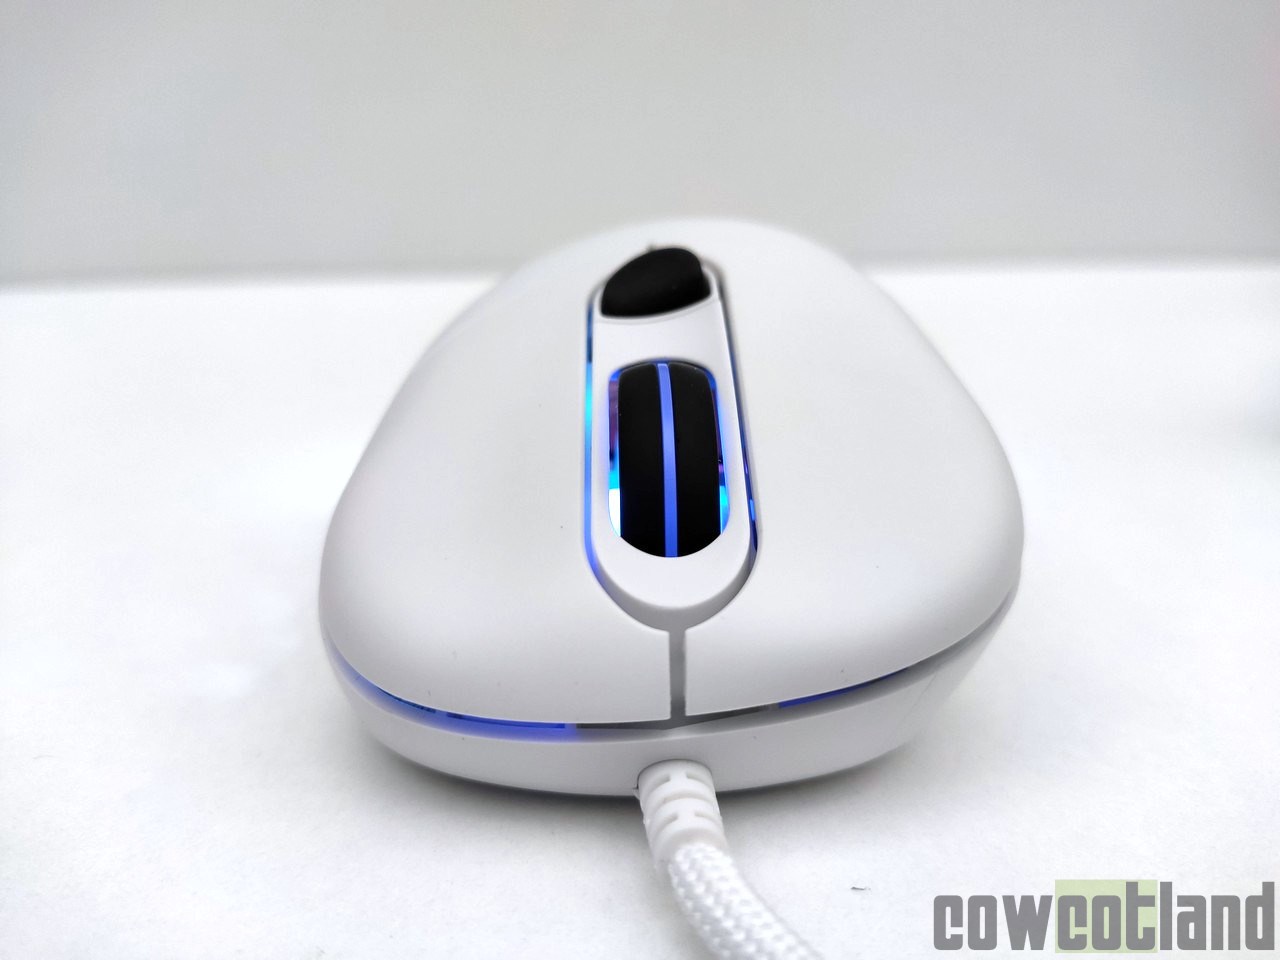 Image 43516, galerie Test souris Gaming Sharkoon Light 200 : Zowie-Killer ?